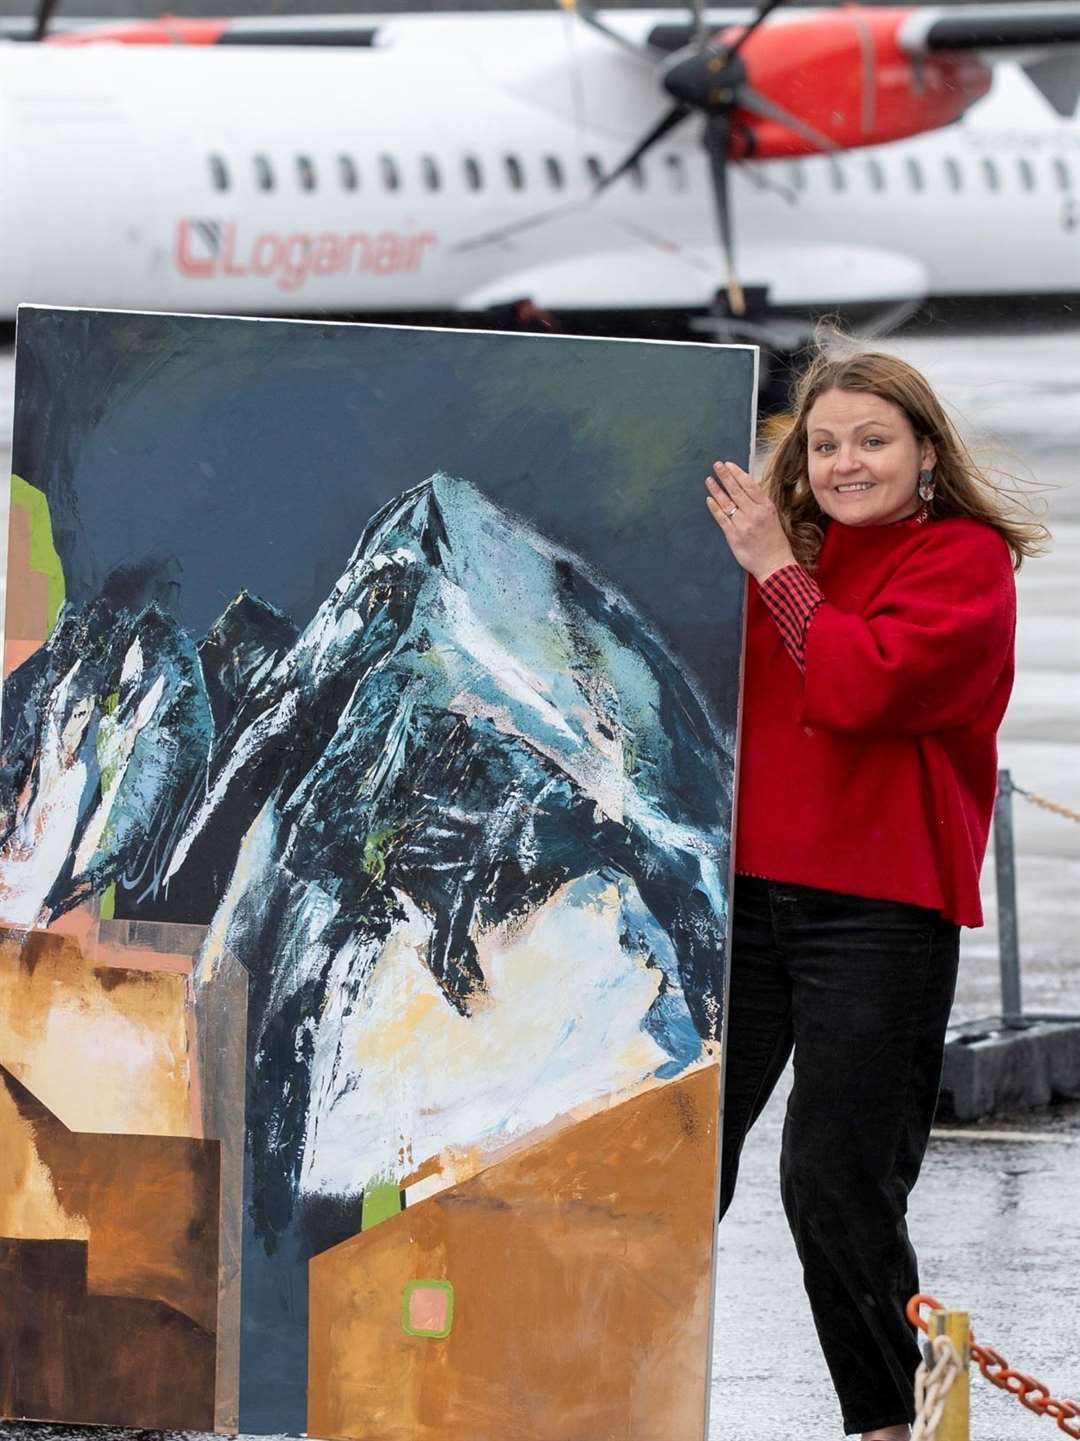 Yelena Visemirska is among the artists whose work will welcome visitors to the Highlands when they arrive at the region's main airport, and promote the region as a burgeoning centre for creative practice. Photograph by Martin Shields